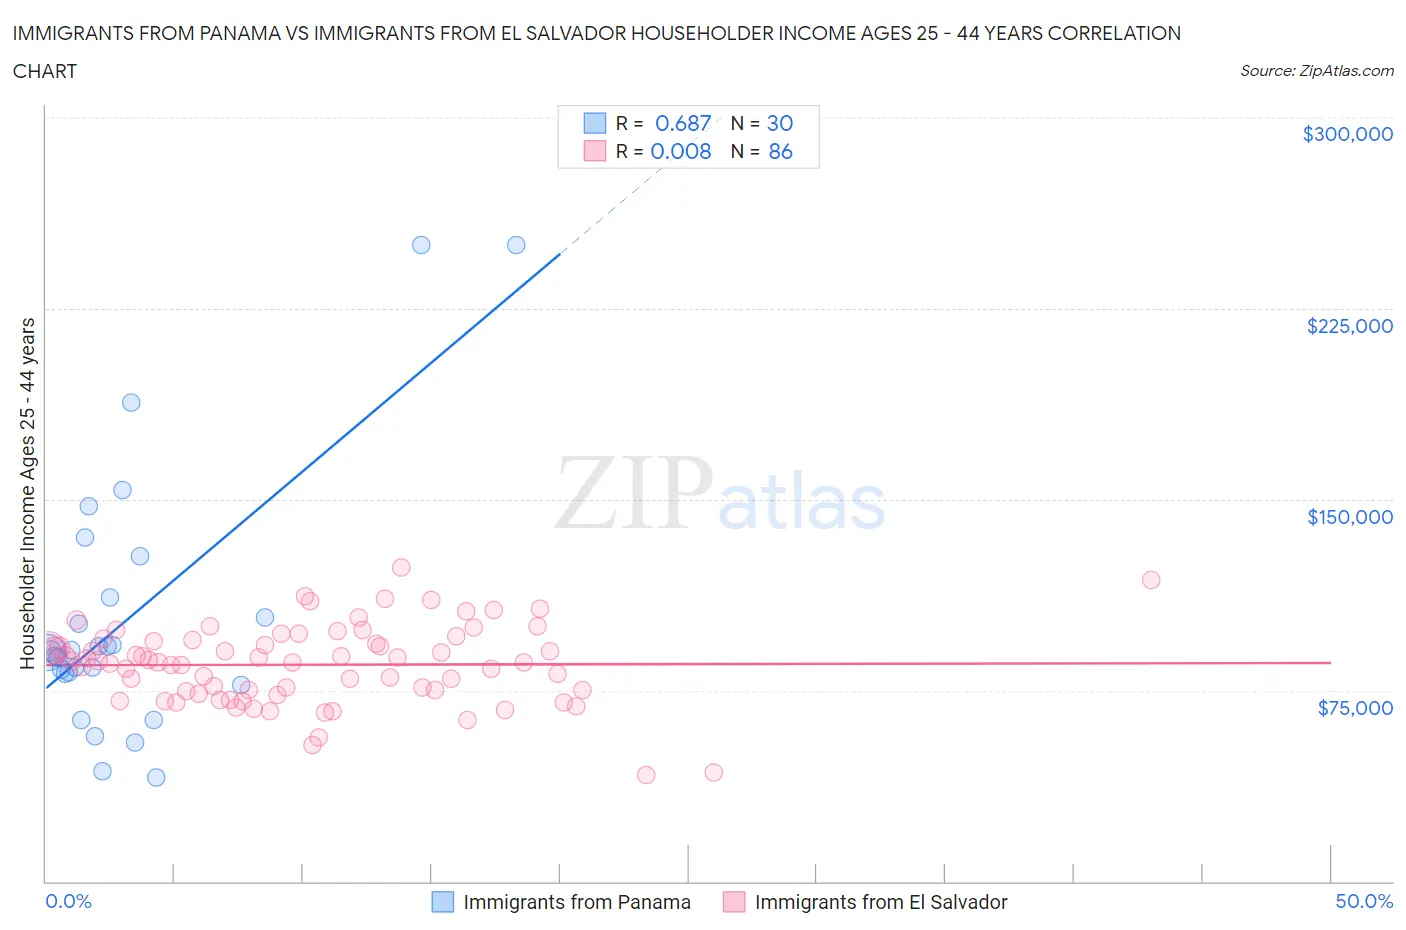 Immigrants from Panama vs Immigrants from El Salvador Householder Income Ages 25 - 44 years